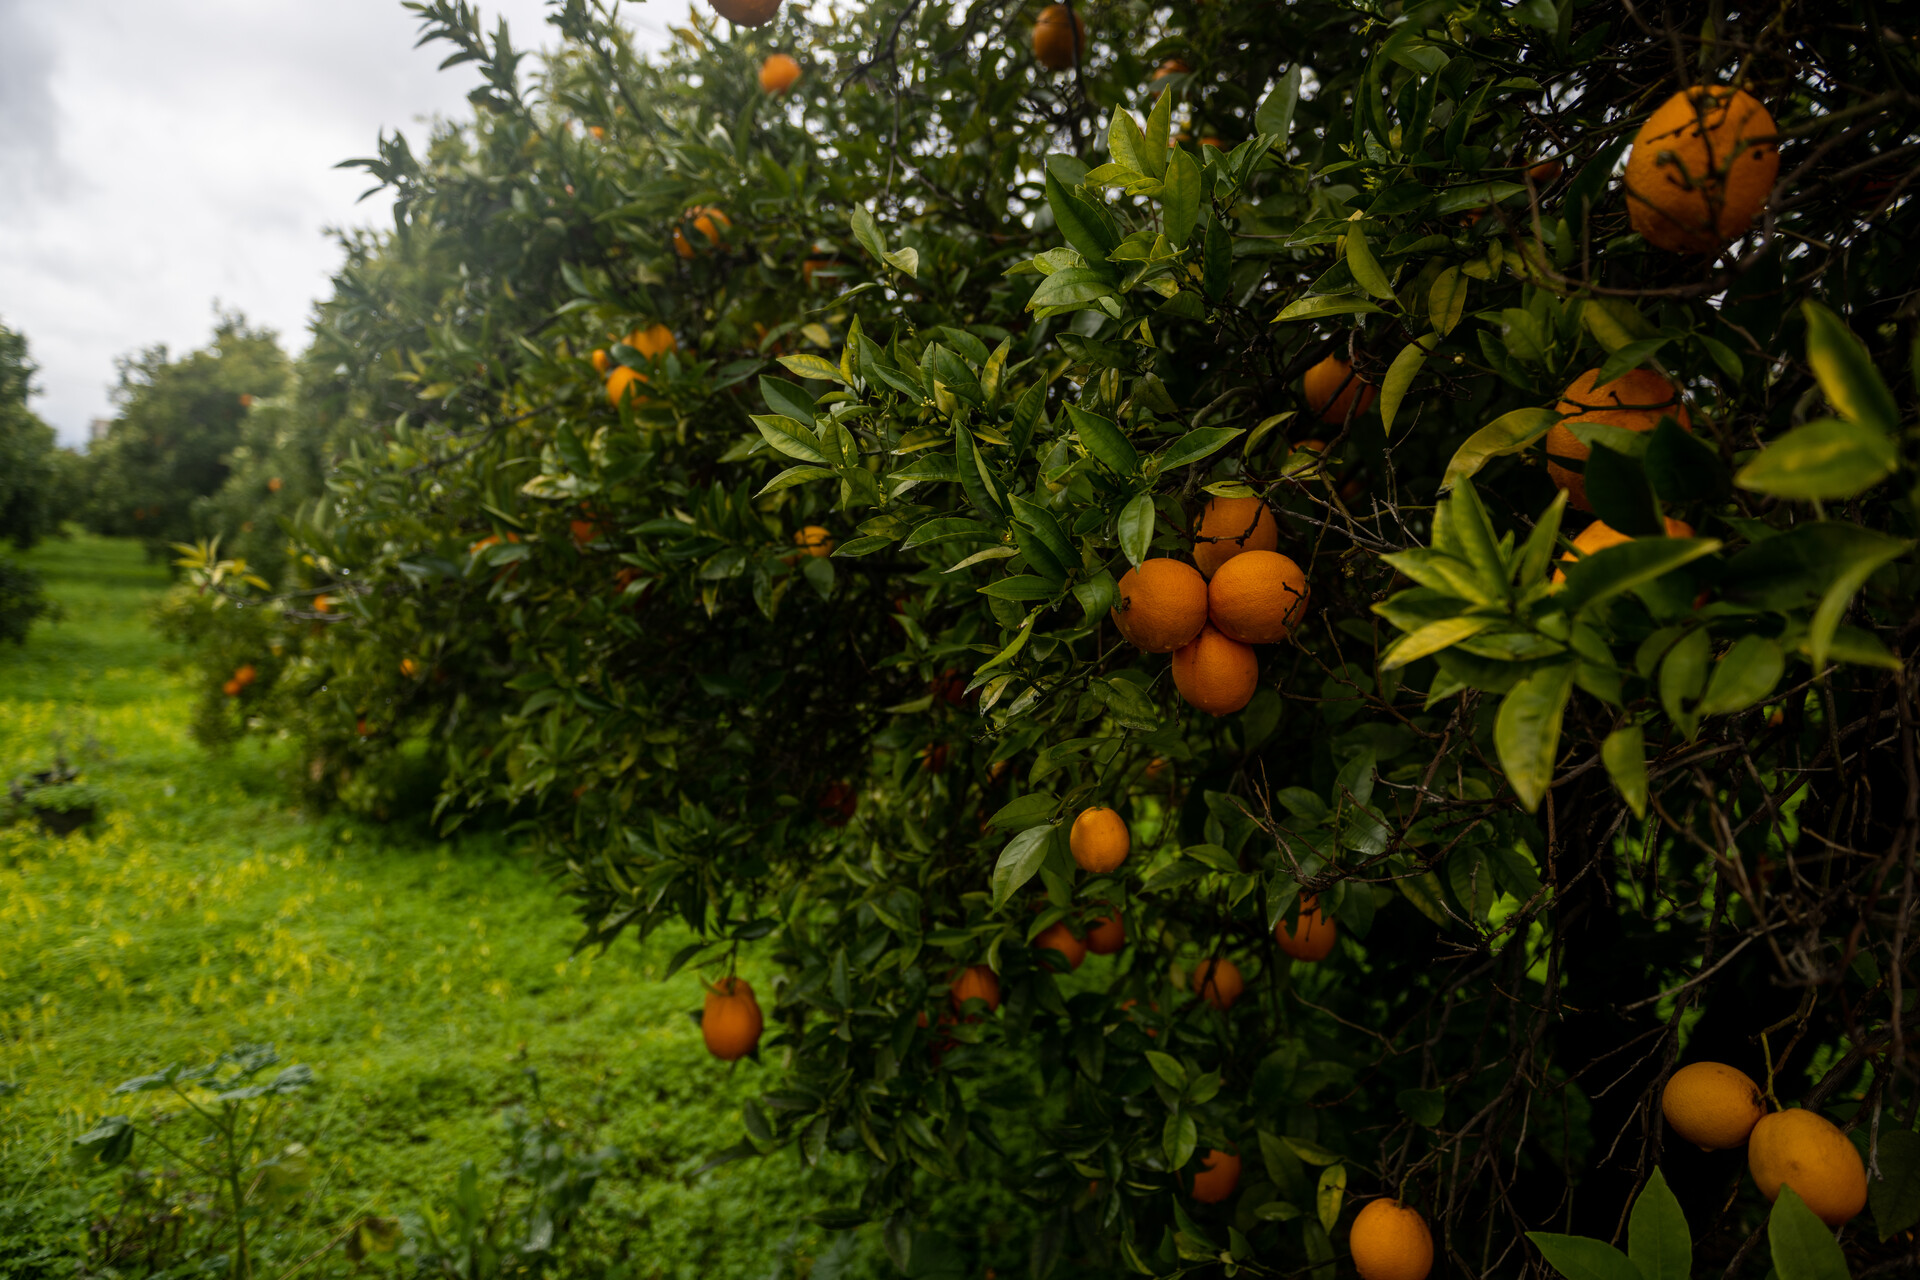 An orange tree with dozens of large oranges on its branches that look ready to be picked. 